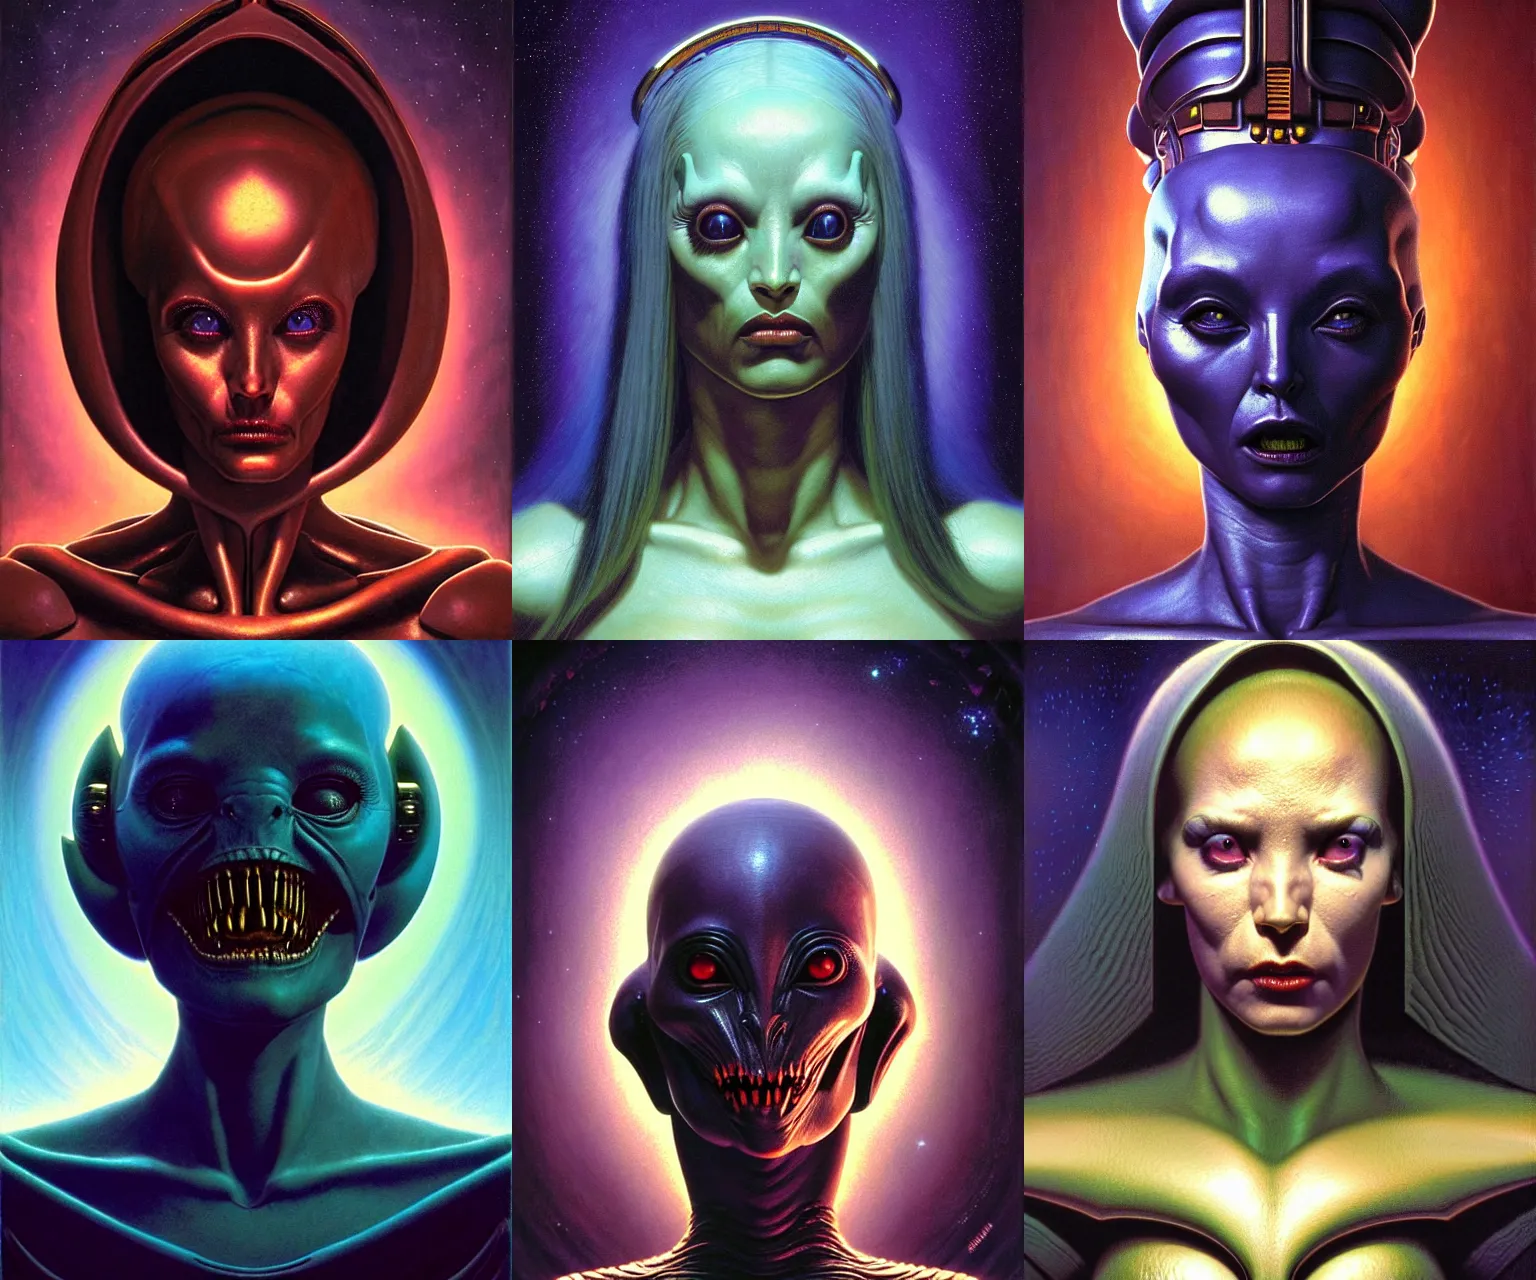 Female Alien with Blue Hair and Extraterrestrial Features - wide 2